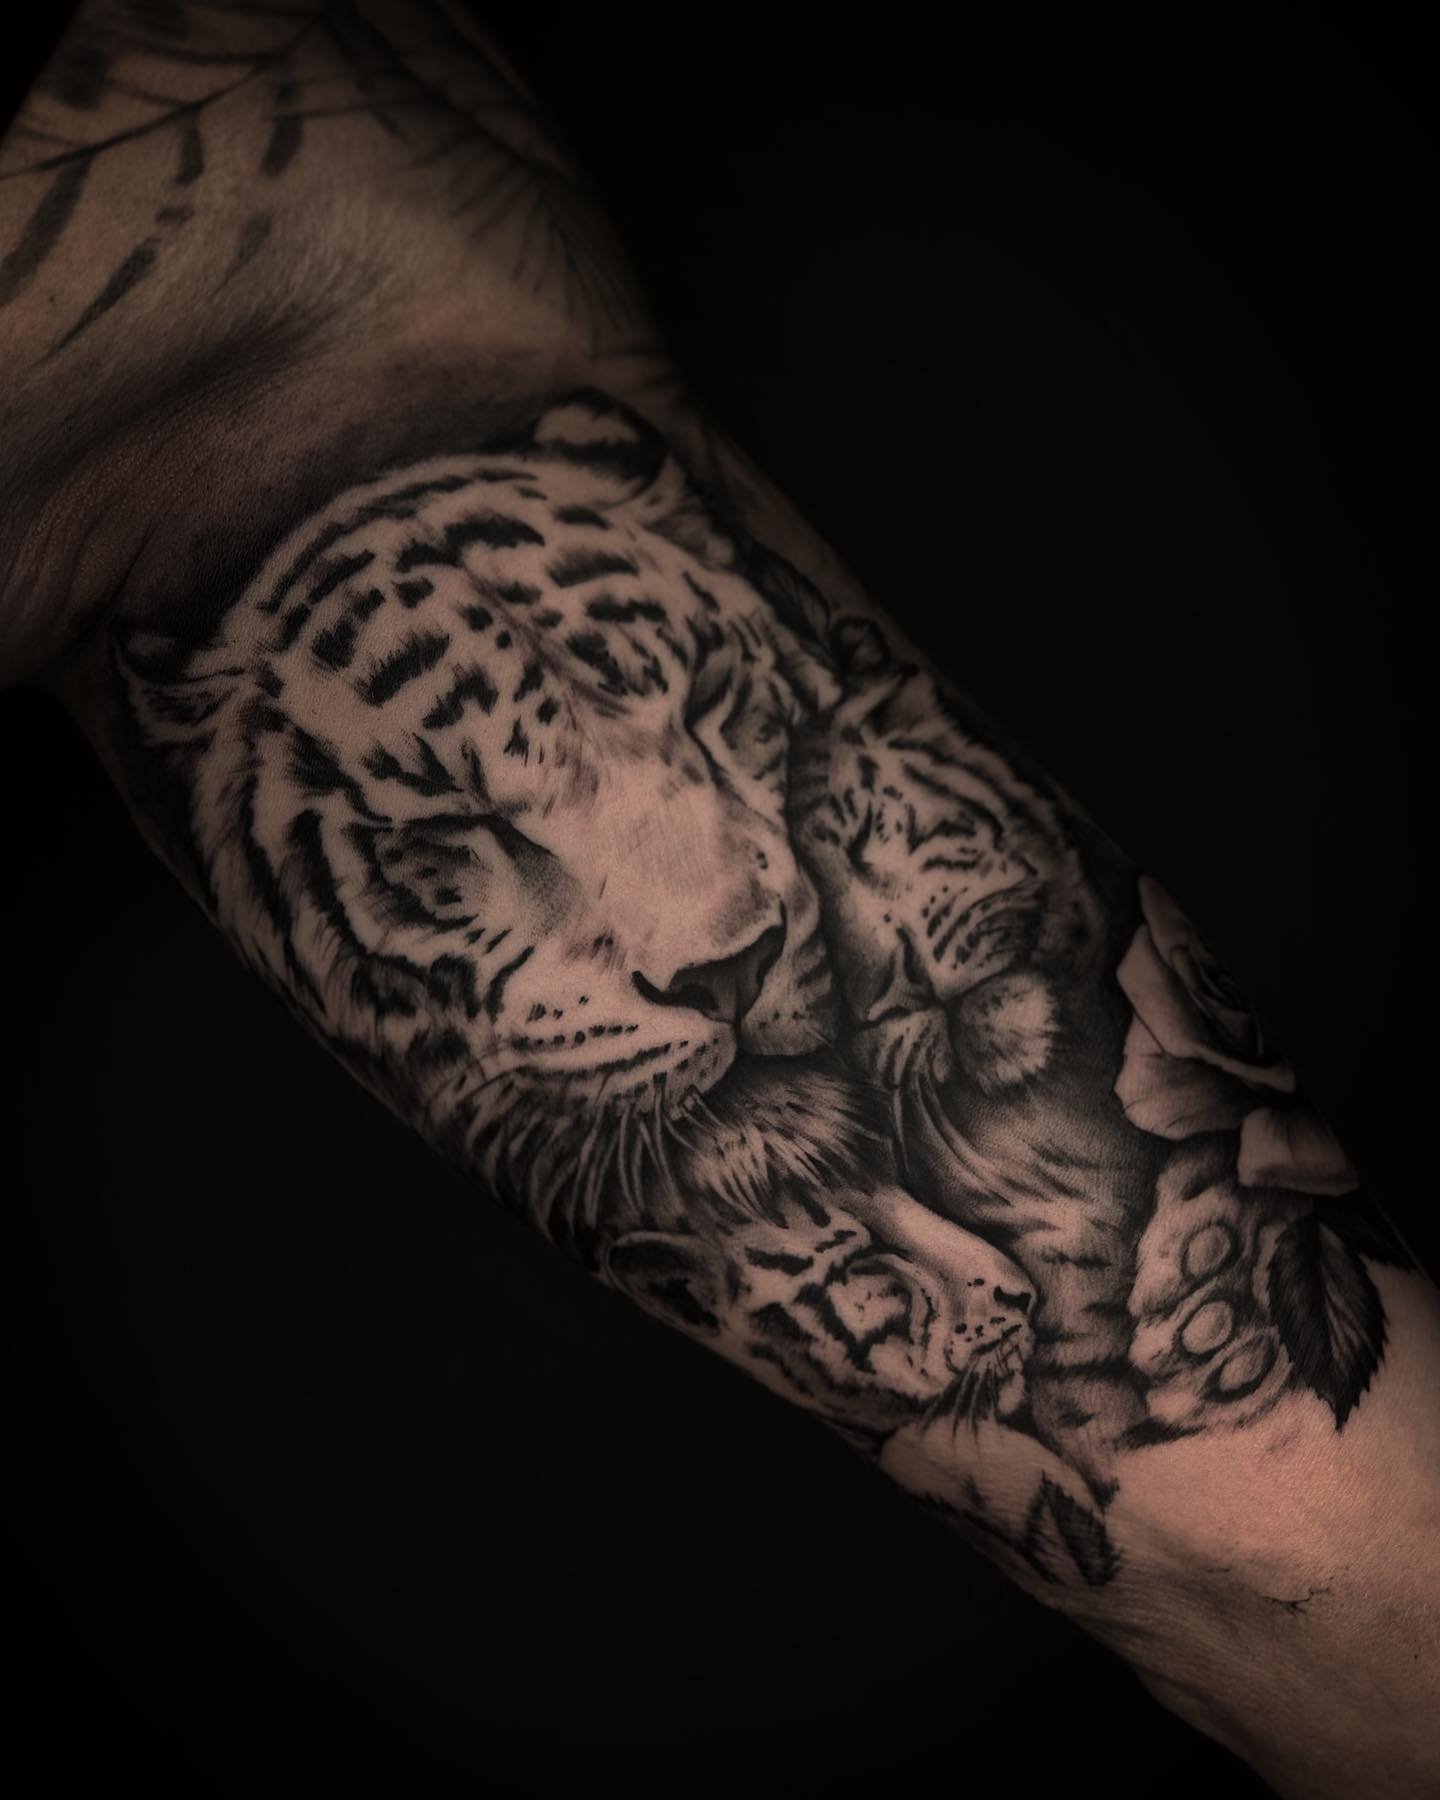 Tigress and cubs for @ryan.wallace.988 
.
.
.
.
.
#tigertattoo #tiger #tattoo #realism #realismtattoo